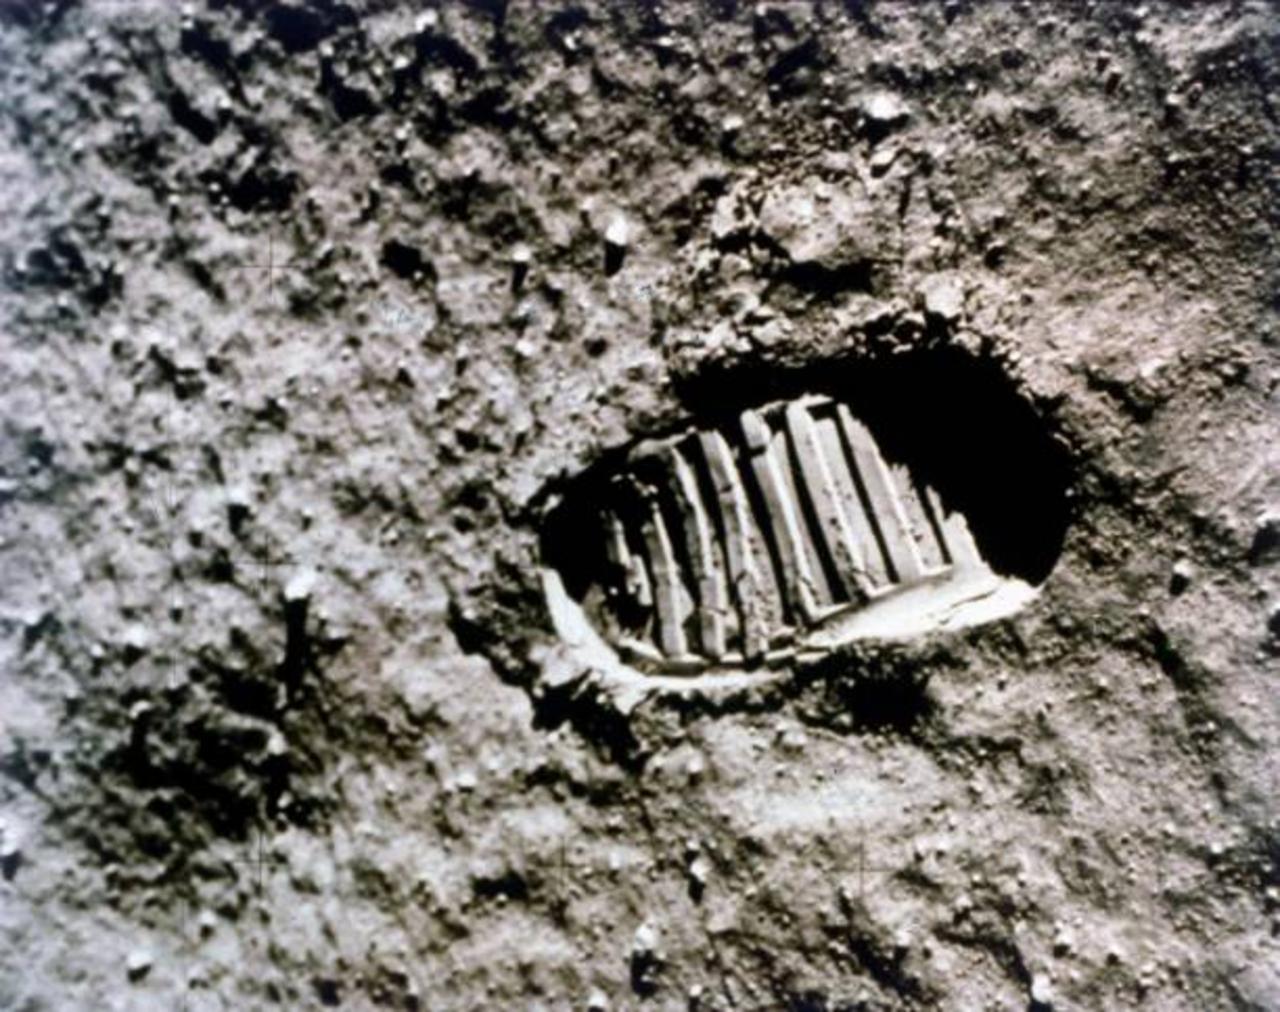 This Day in History: Armstrong Walks on Moon